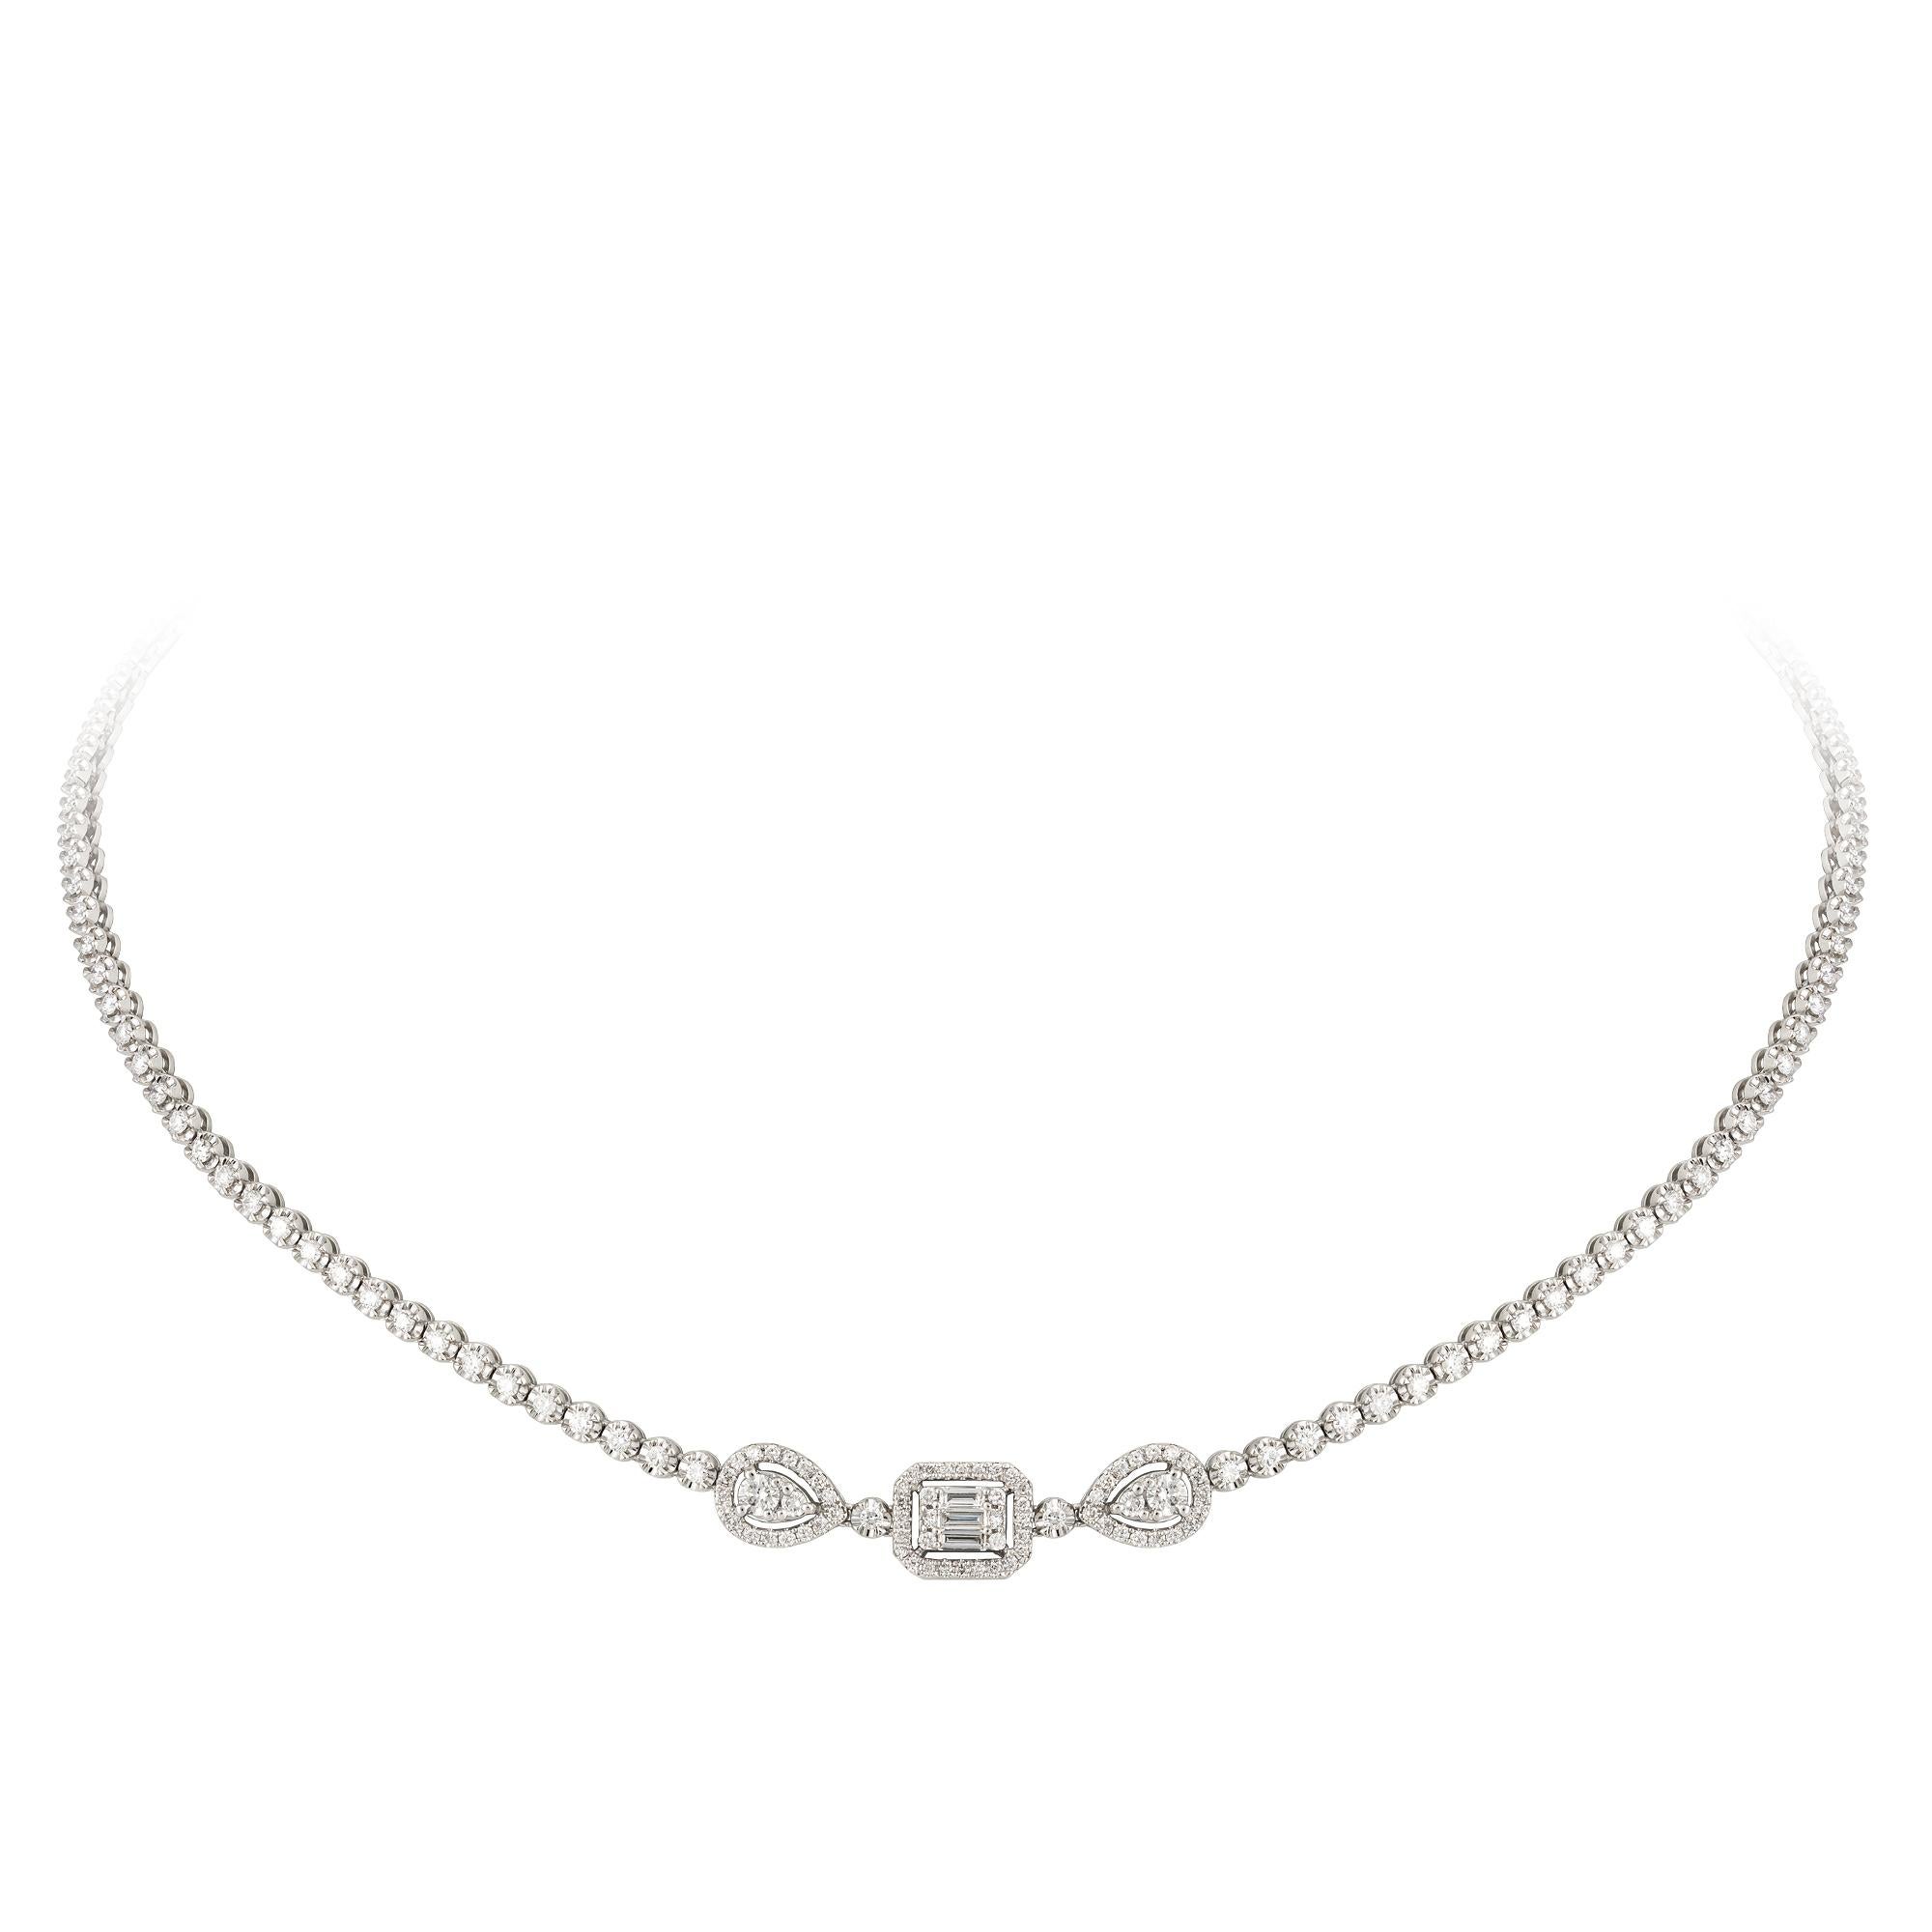 NECKLACE 18K White Gold 
Diamond 1.57 Cts/148 Pcs 
TB 0.09 Cts/5 Pcs

With a heritage of ancient fine Swiss jewelry traditions, NATKINA is a Geneva based jewellery brand, which creates modern jewellery masterpieces suitable for every day life.
It is